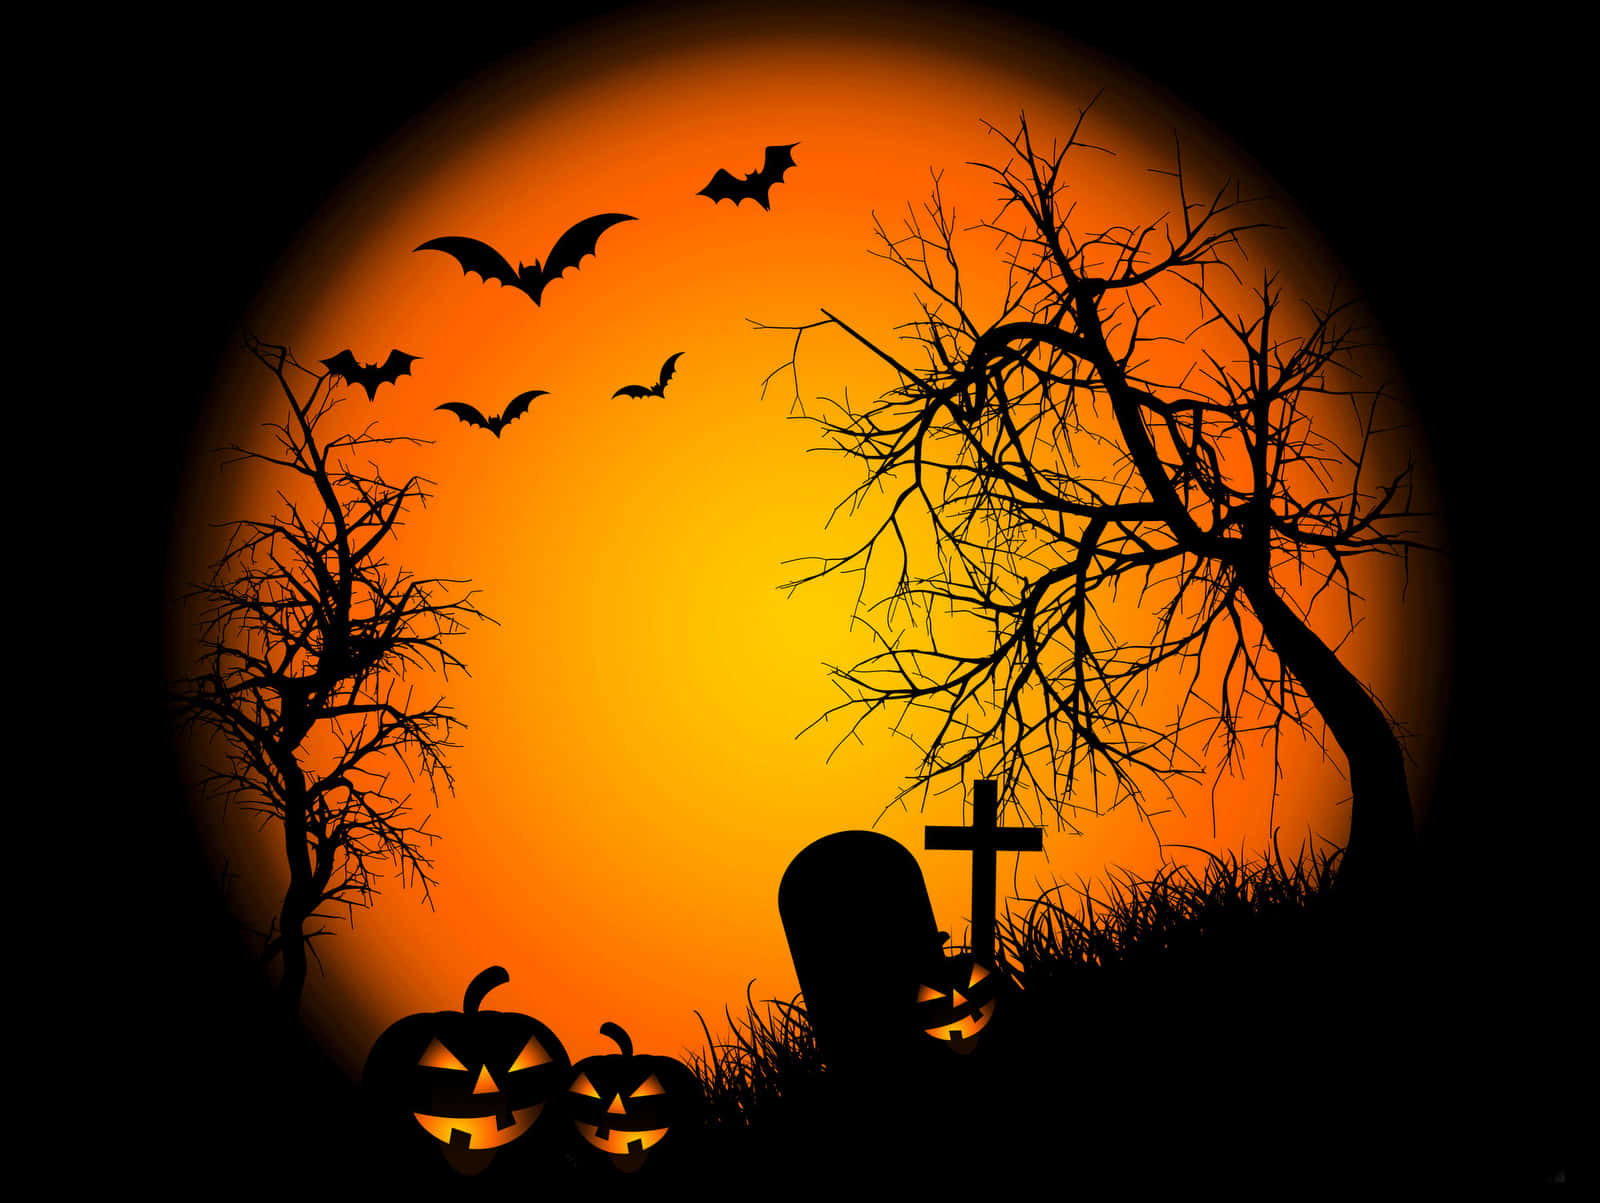 Spook your friends with this Halloween profile picture!